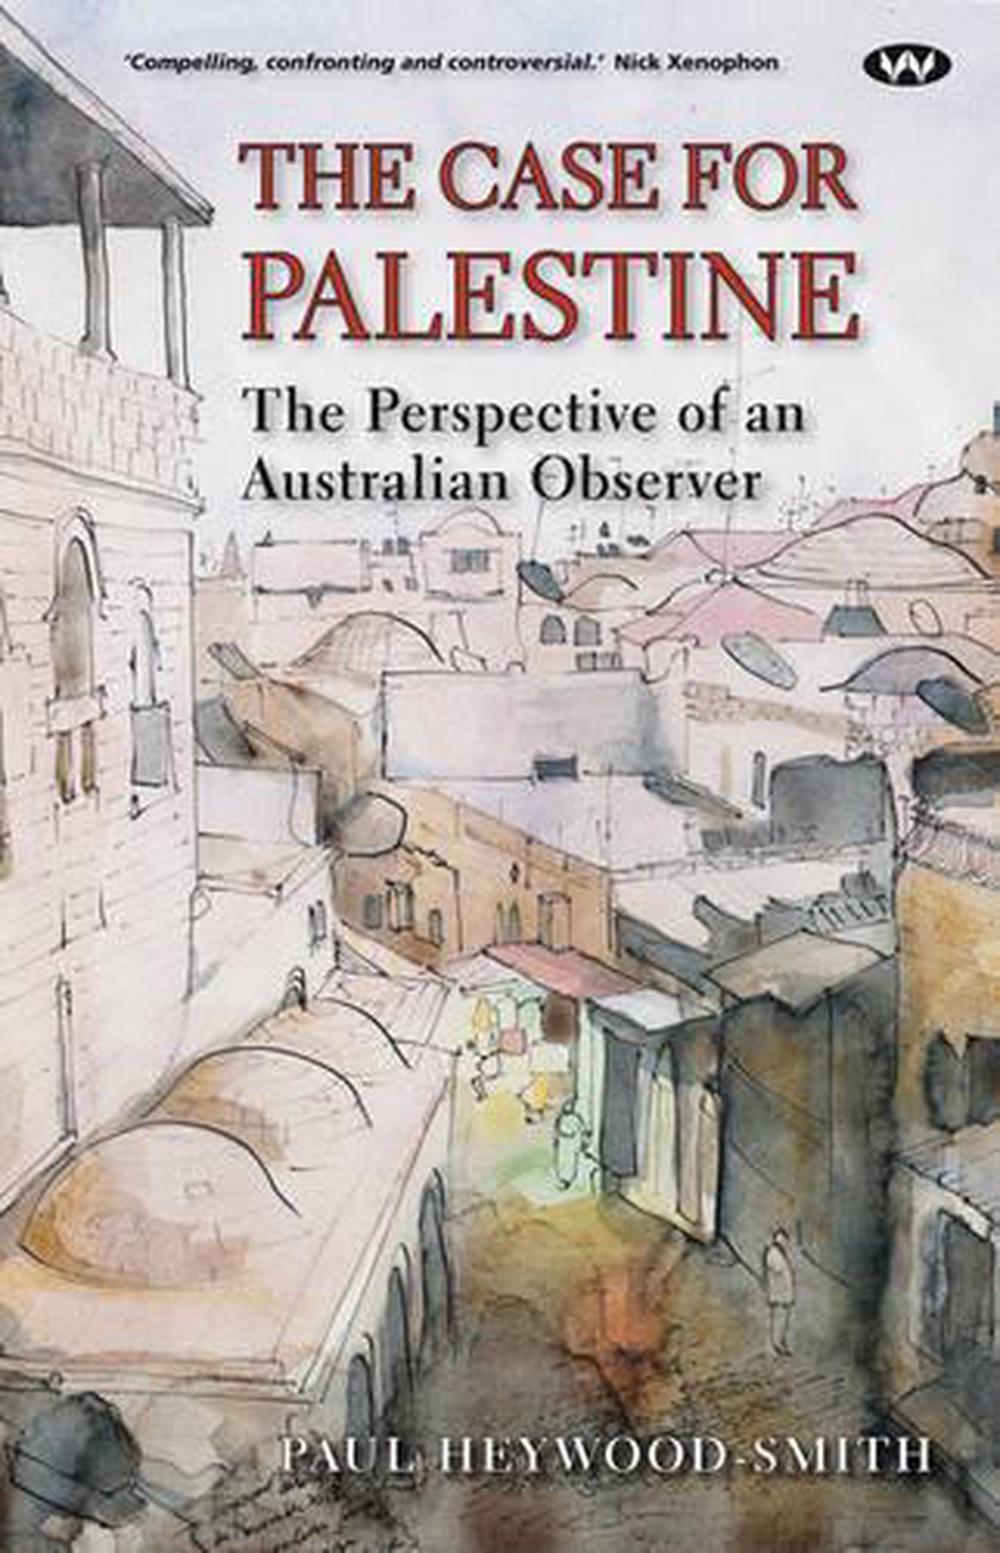 The Case for Palestine by Paul HeywoodSmith, Paperback, 9781743053300